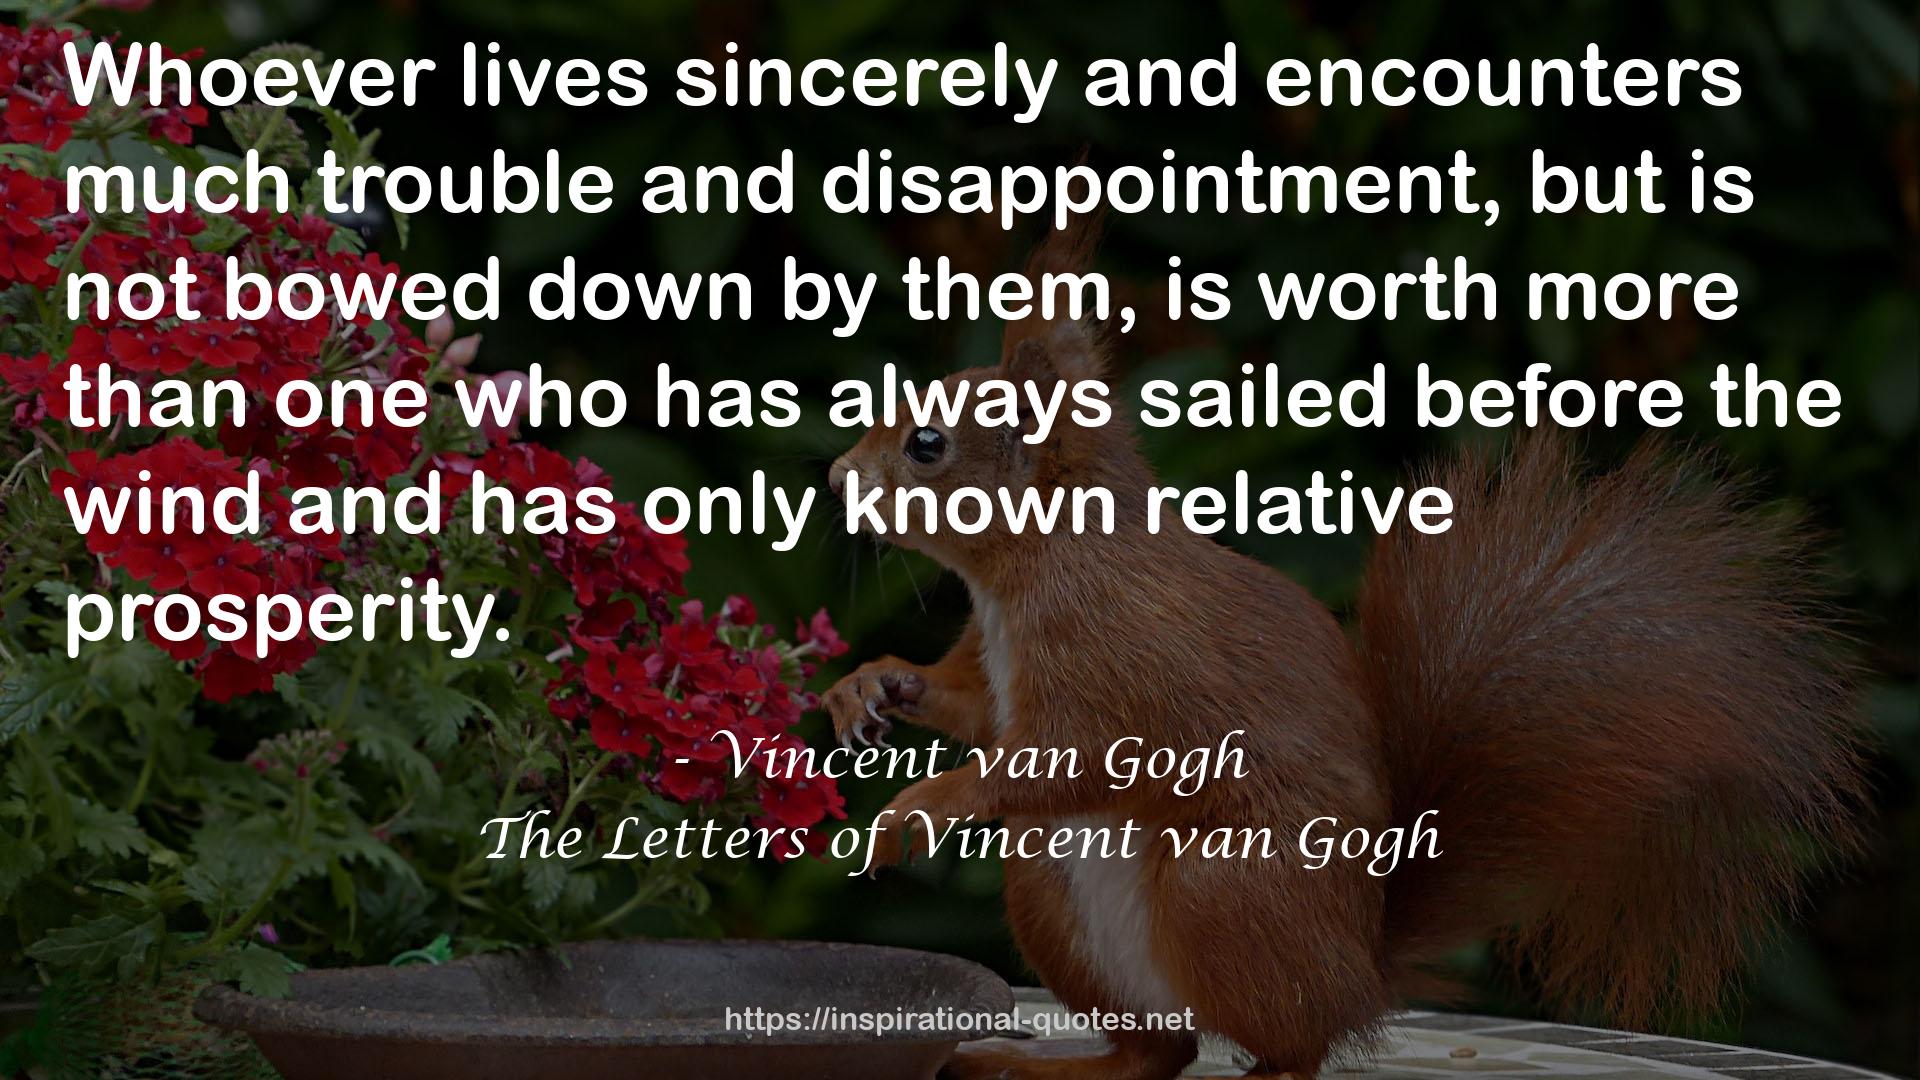 The Letters of Vincent van Gogh QUOTES